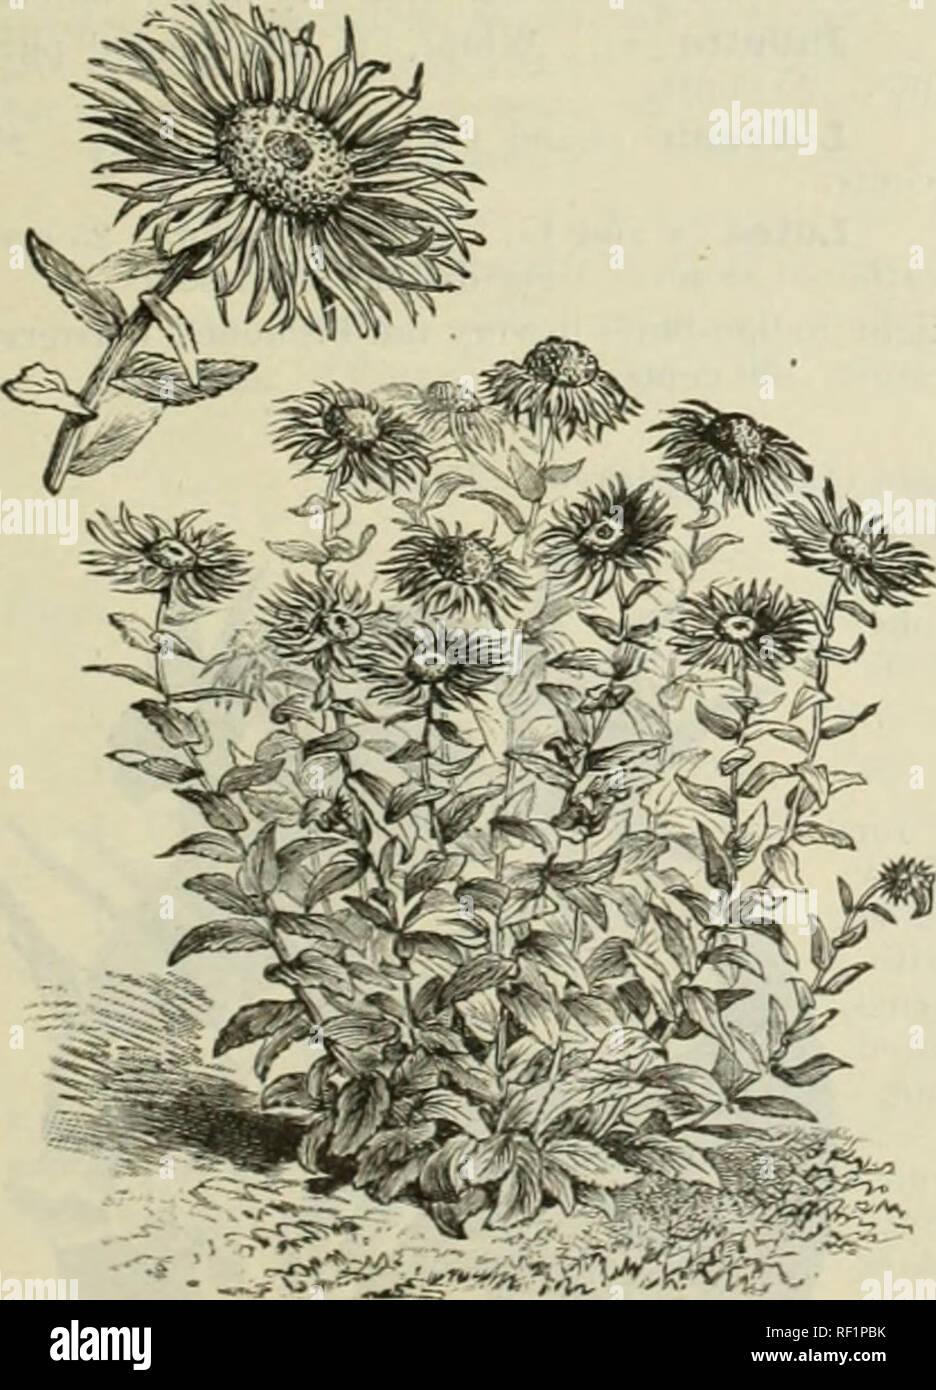 . Catalogue of hardy ornamental trees, shrubs, and vines, hardy flowers and large and small fruits. Nurseries (Horticulture) Massachusetts Catalogs; Plants, Ornamental Catalogs; Trees Seedlings Catalogs; Ornamental shrubs Catalogs; Flowers Catalogs; Fruit Catalogs. Inula glandulosa. showy carpet plants in situations free from foot A — Flea-bane. C CompusiUe.) These are of the easiest culture in ordinary- garden soils. The species quoted are admirable for ordinary border, or can be used to advantage in the rockery if desired. Very effective. H. ensifolia. 6' in., 8-10. Austria. Showy bright-yel Stock Photo